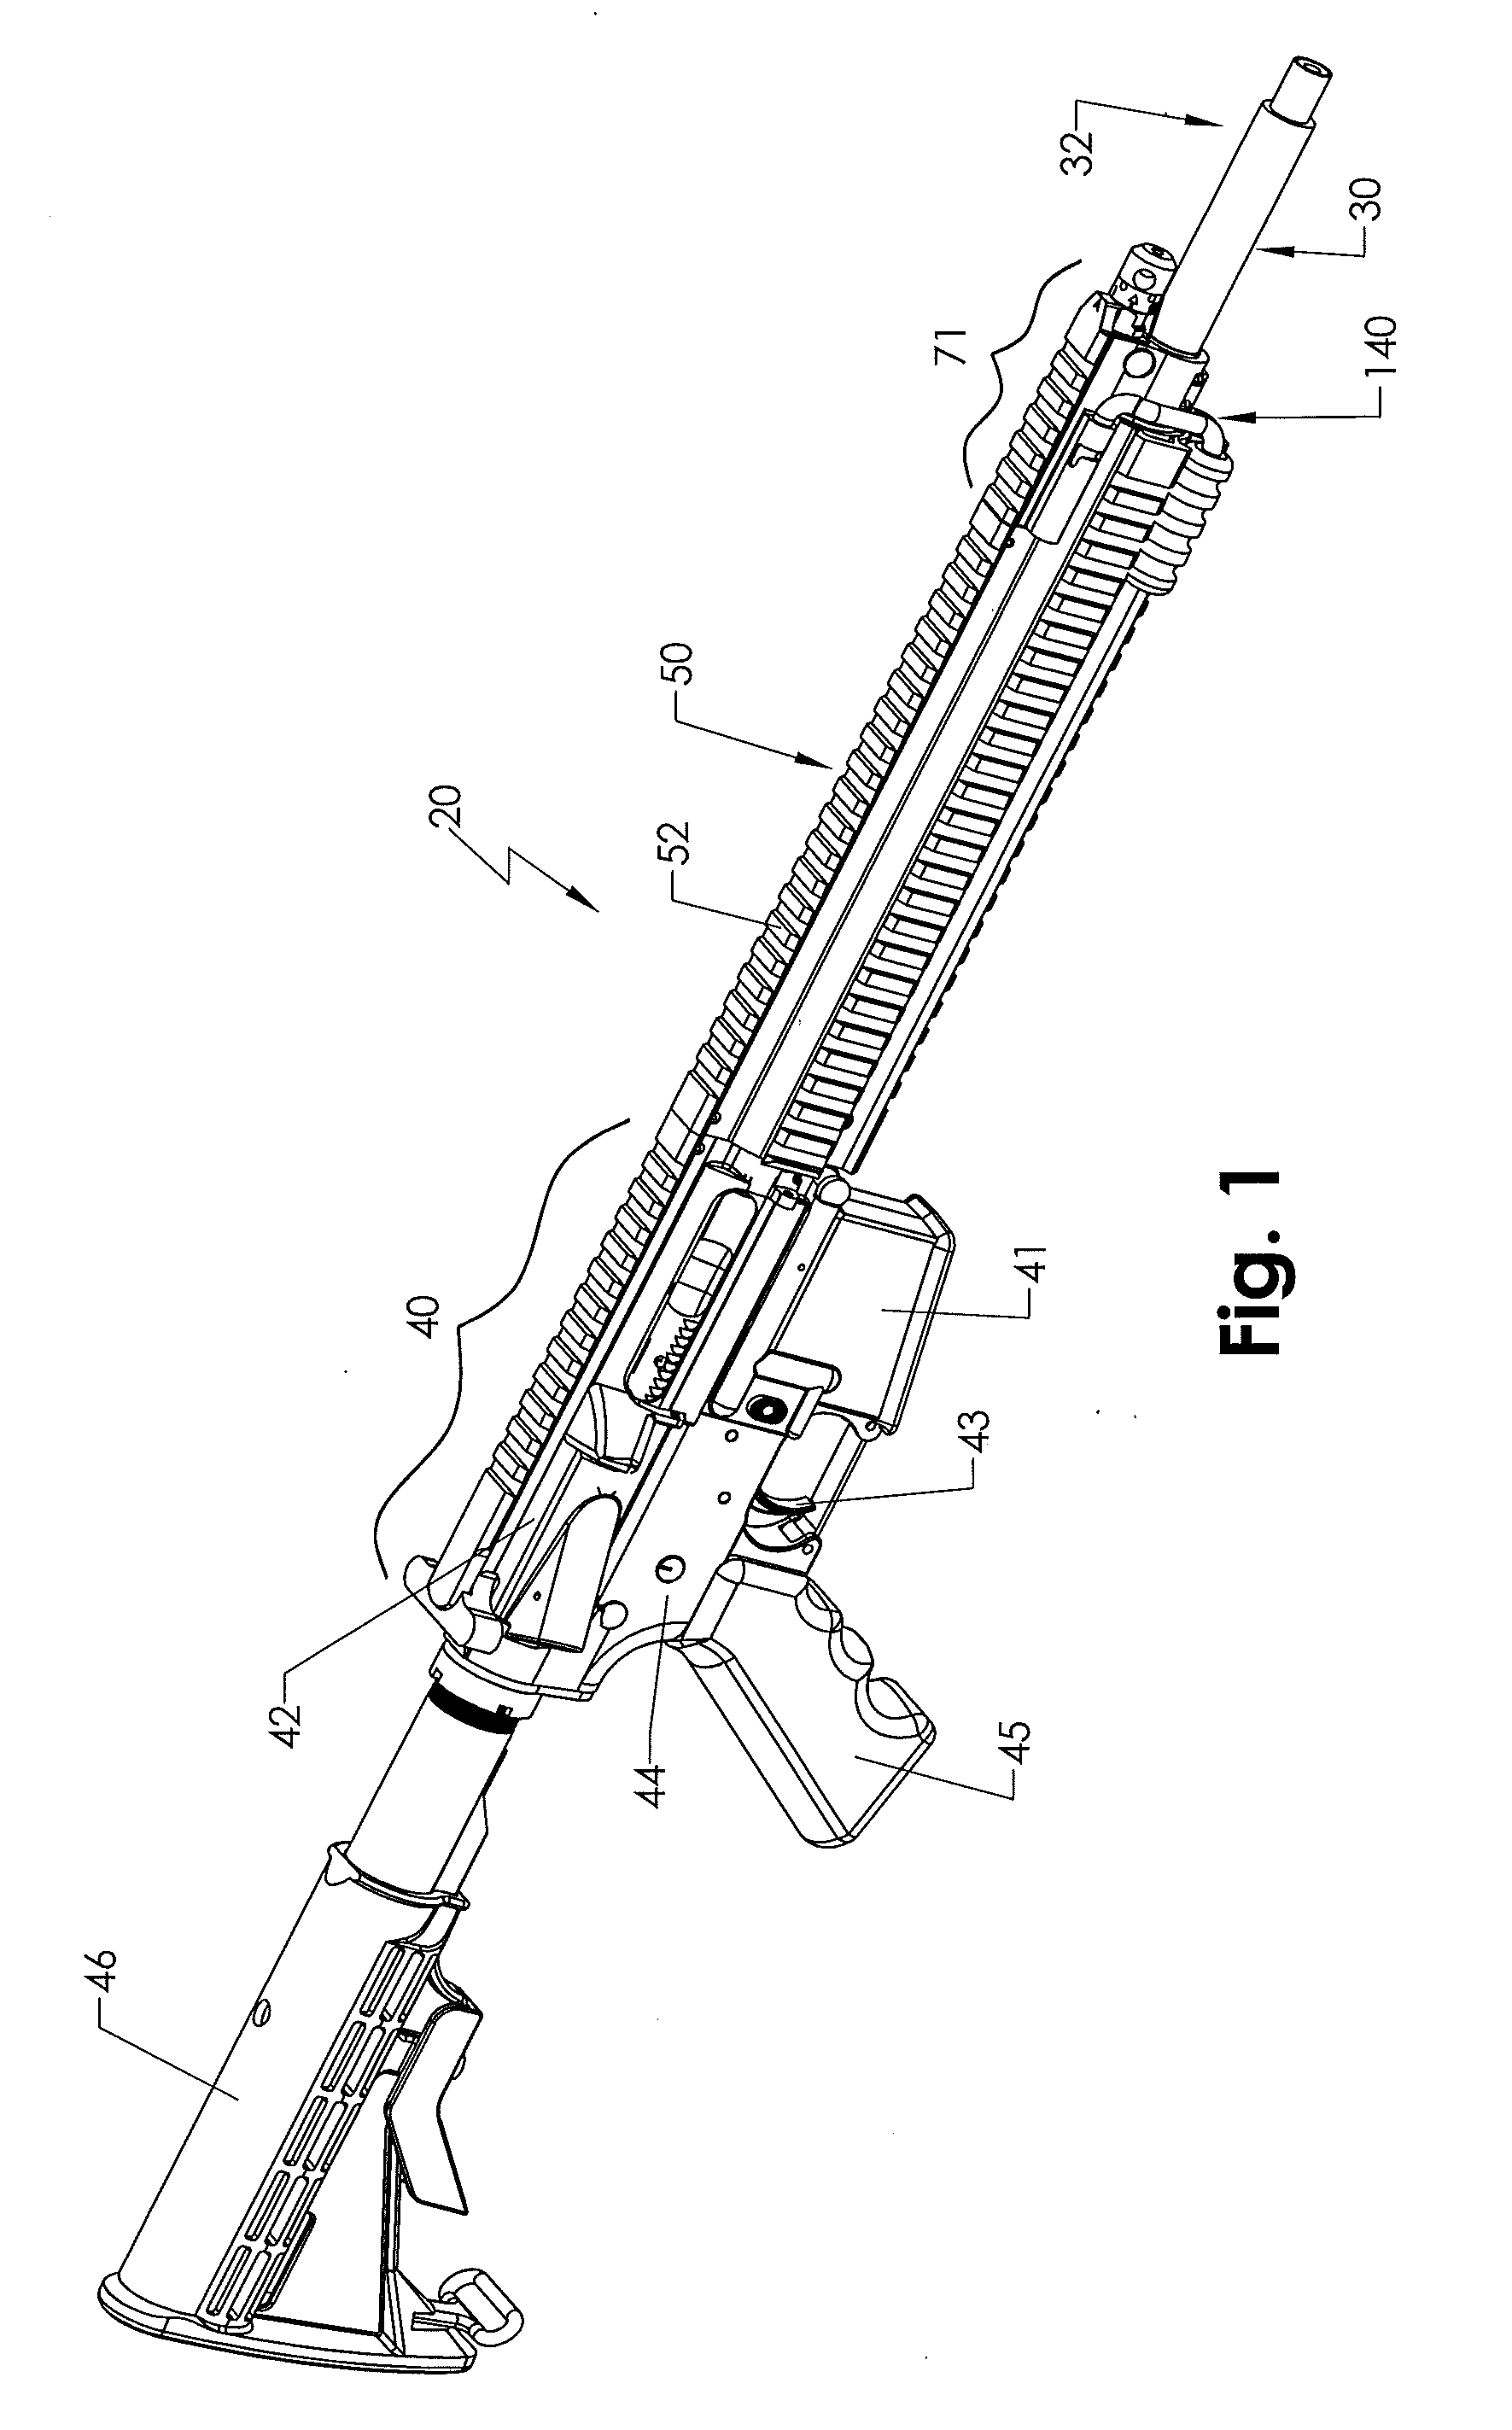 Bolt carrier for gas operated rifle